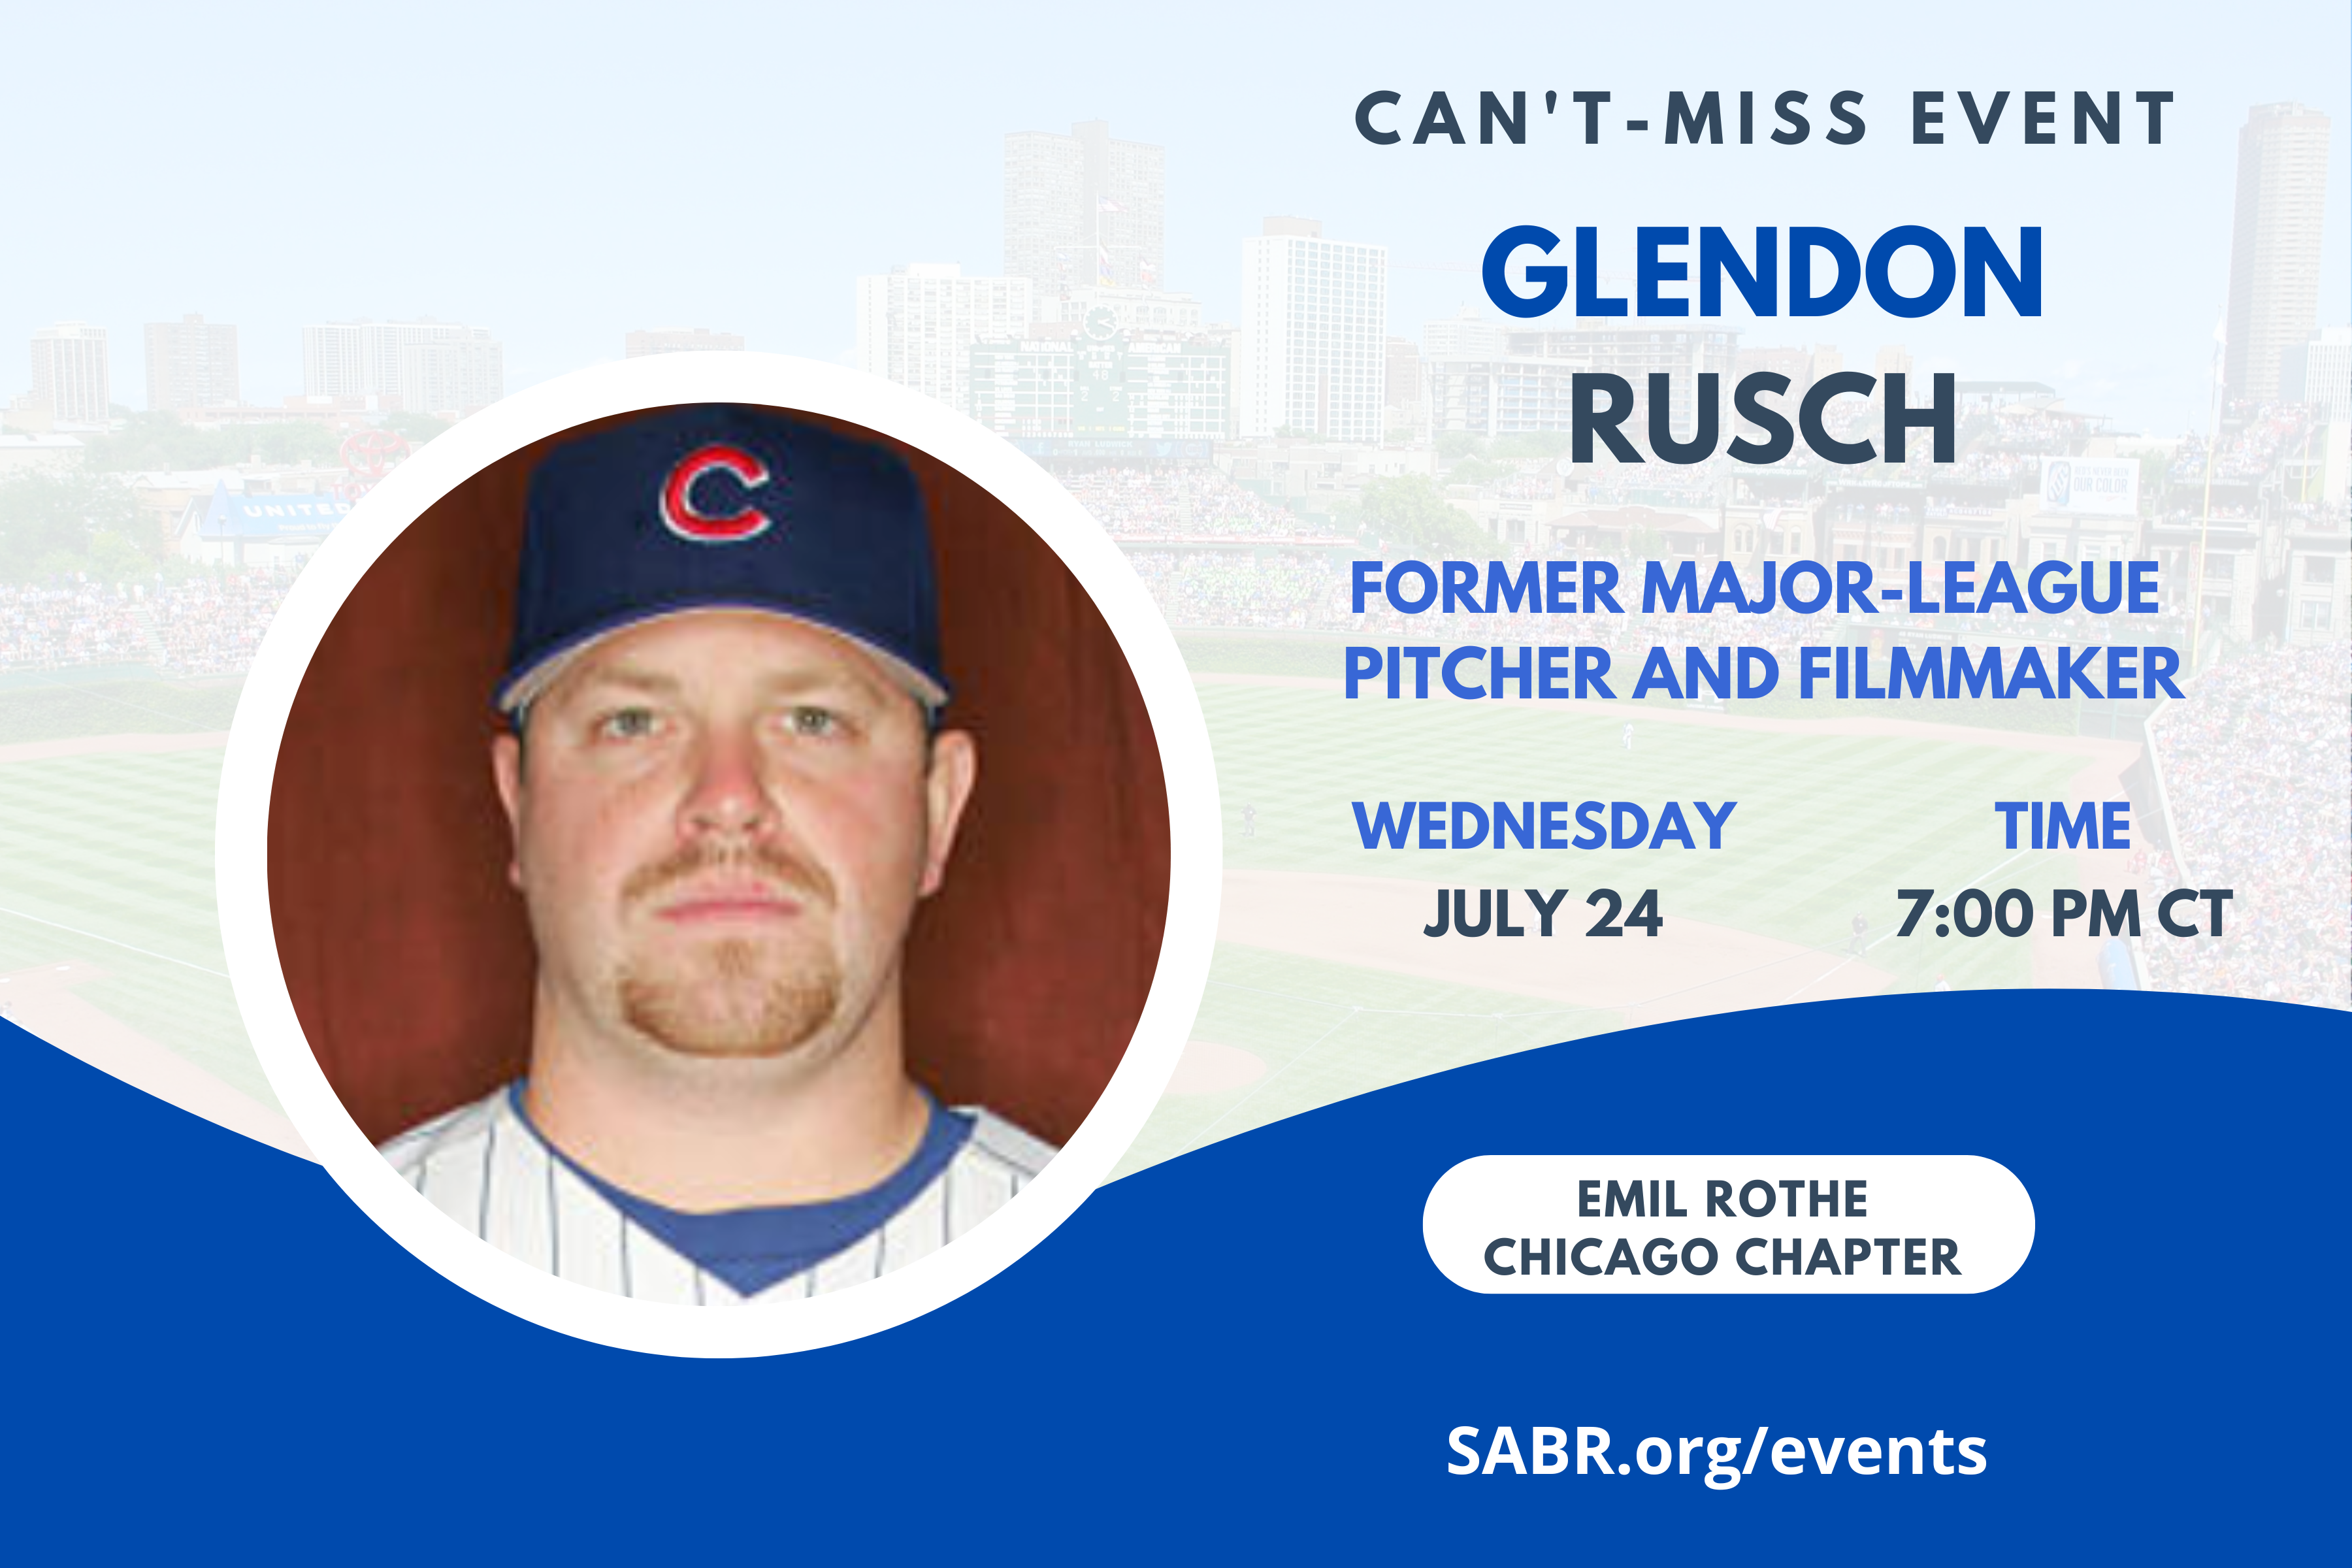 SABR's Emil Rothe Chicago Chapter invites all baseball fans to join us for a special Zoom meeting with former MLB pitcher (and filmmaker) Glendon Rusch at 7:00 p.m. Central time on Wednesday, July 24.